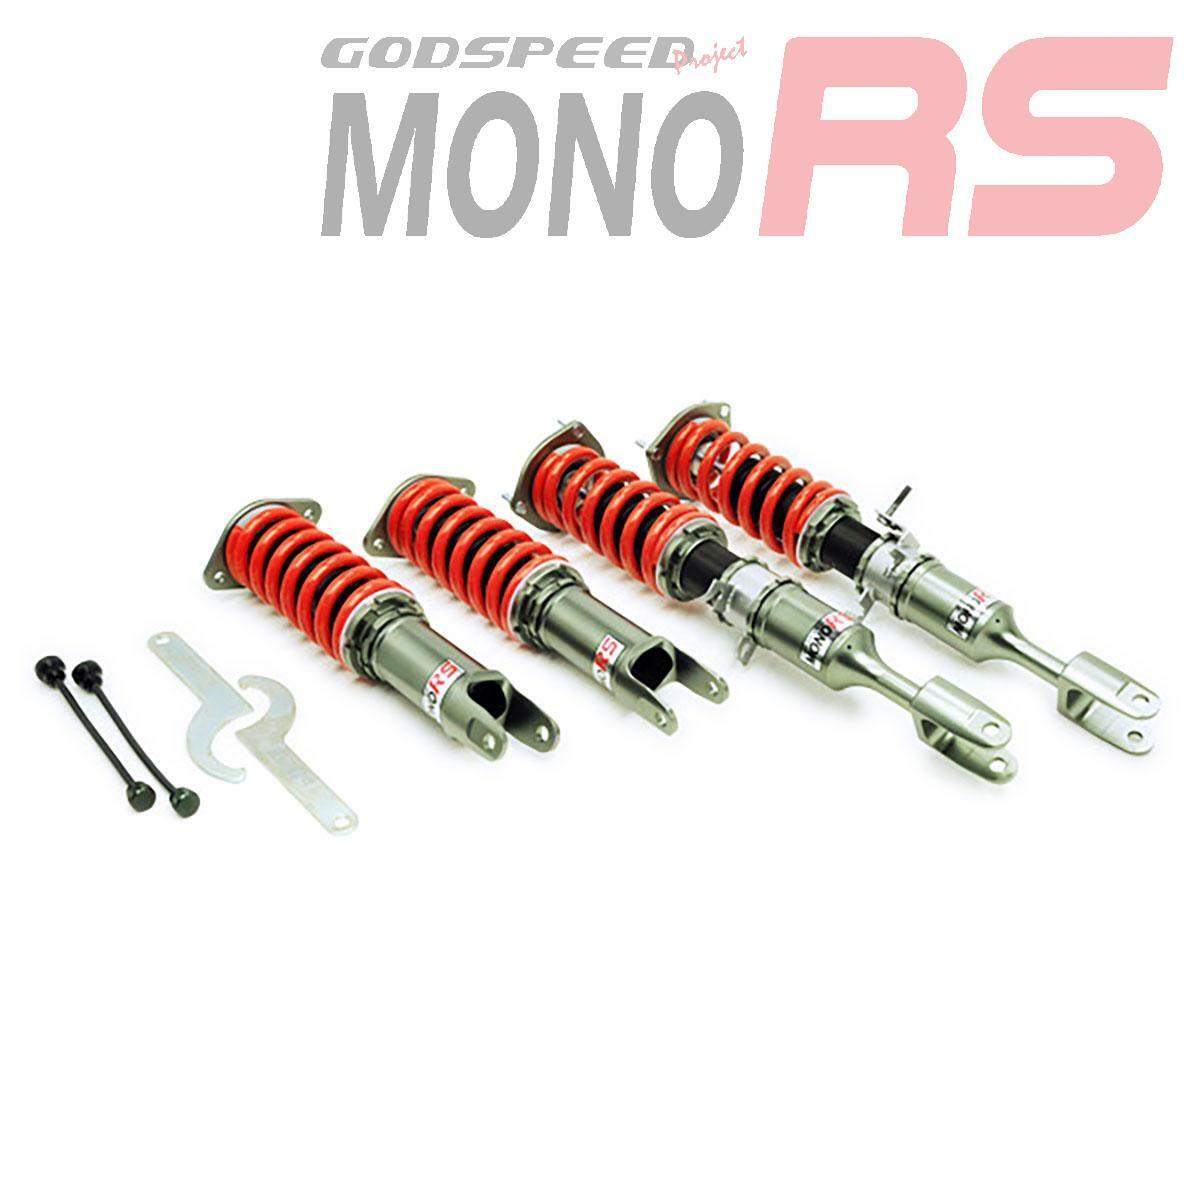 Godspeed(MRS1550) MonoRS Coilovers For Infiniti G35 03-07 2DR/03-06 4DR(V35) RWD